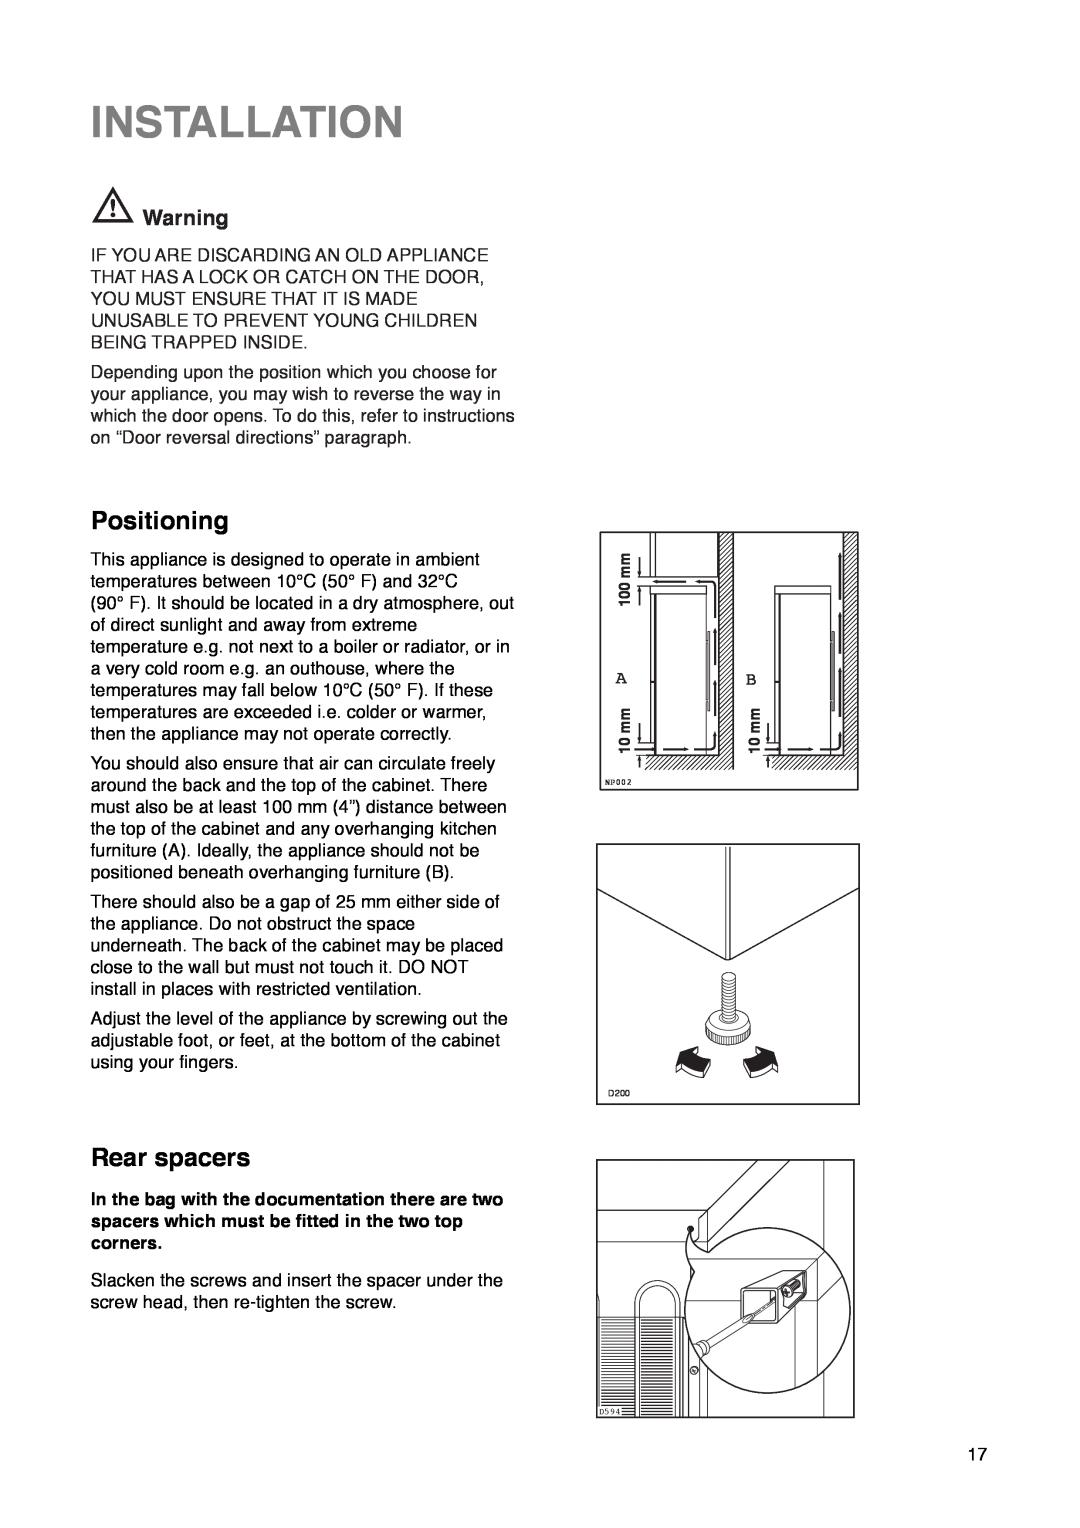 Tricity Bendix FD 852 A installation instructions Installation, Positioning, Rear spacers 